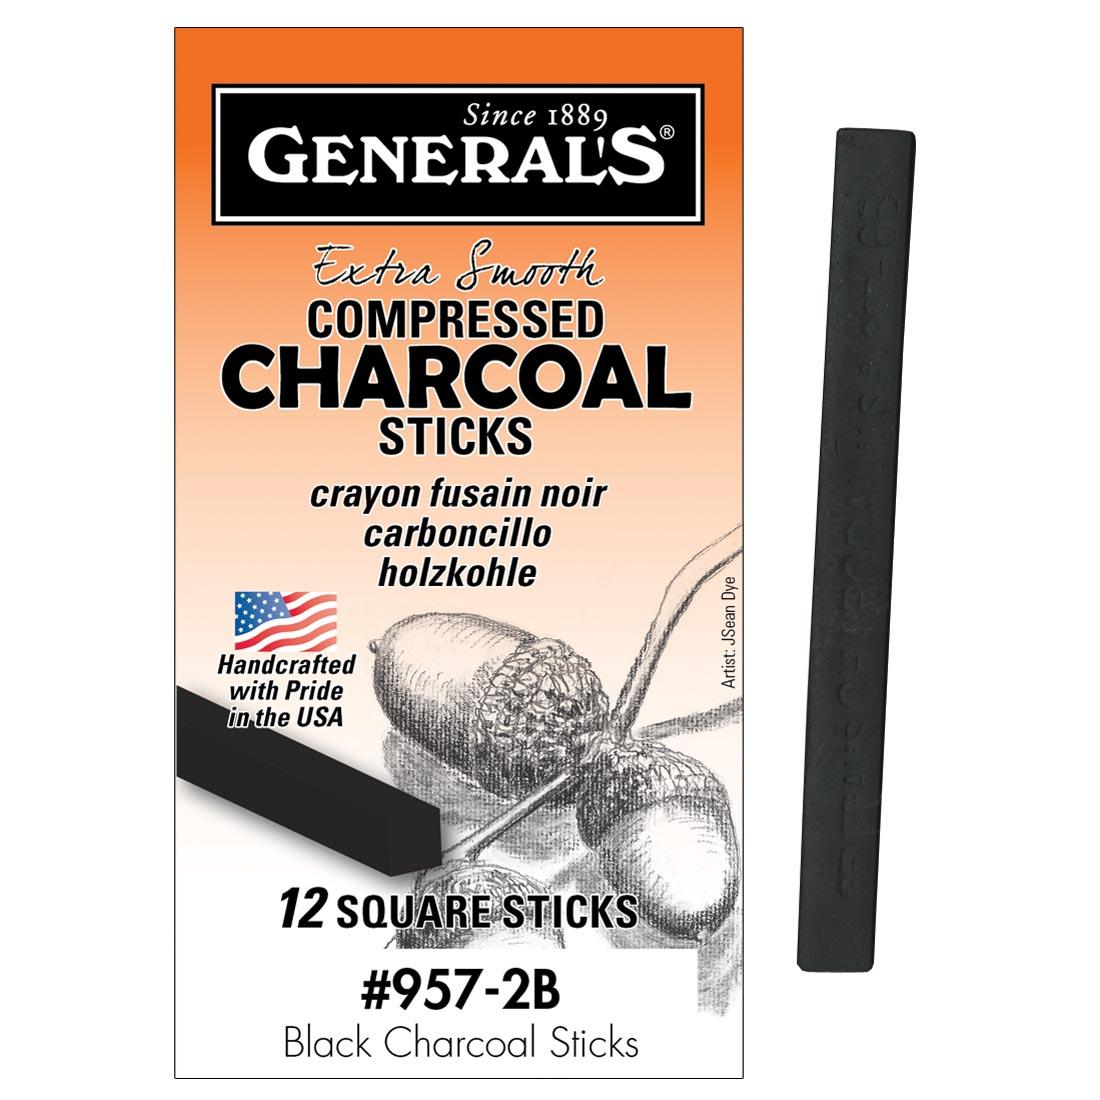 General's Compressed Charcoal Sticks 12-Count Box